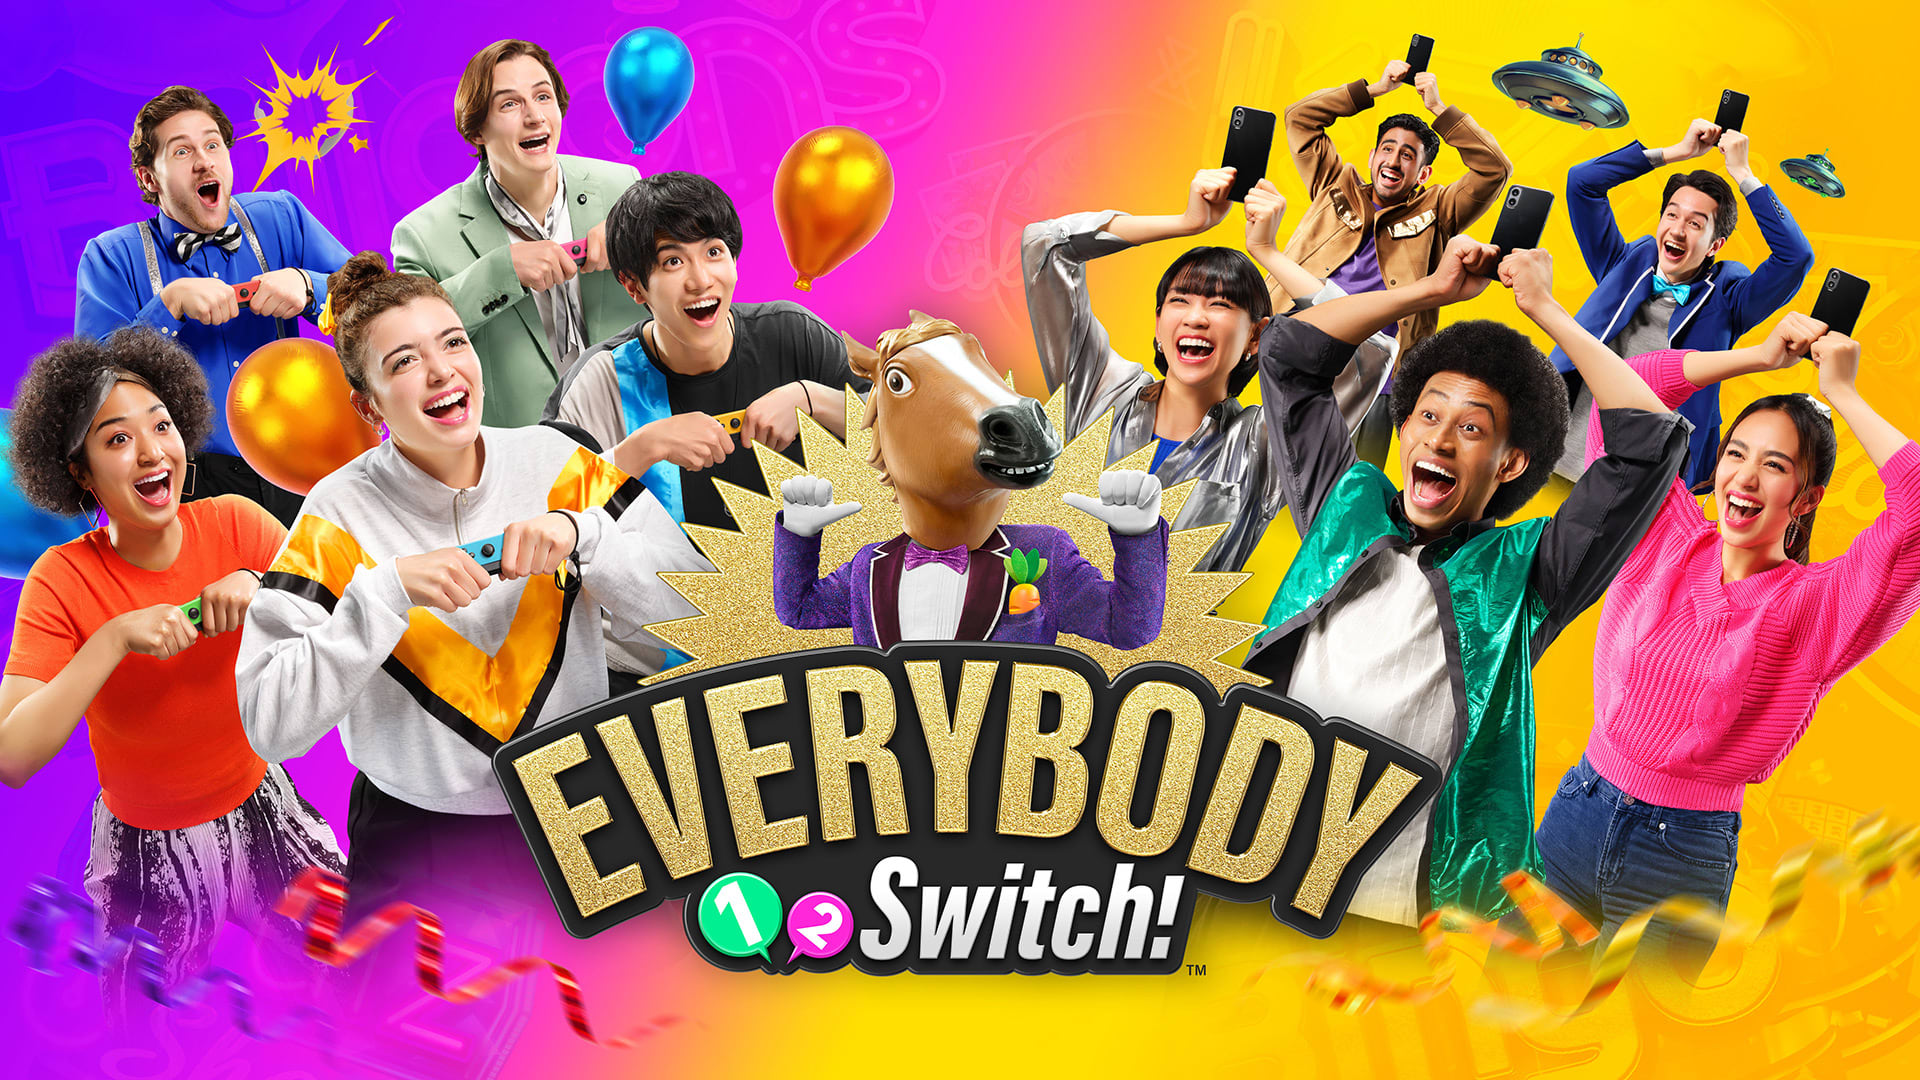 Nintendo's Switch Game: 100-Player Party Takes Social Gaming to New Heights! 21